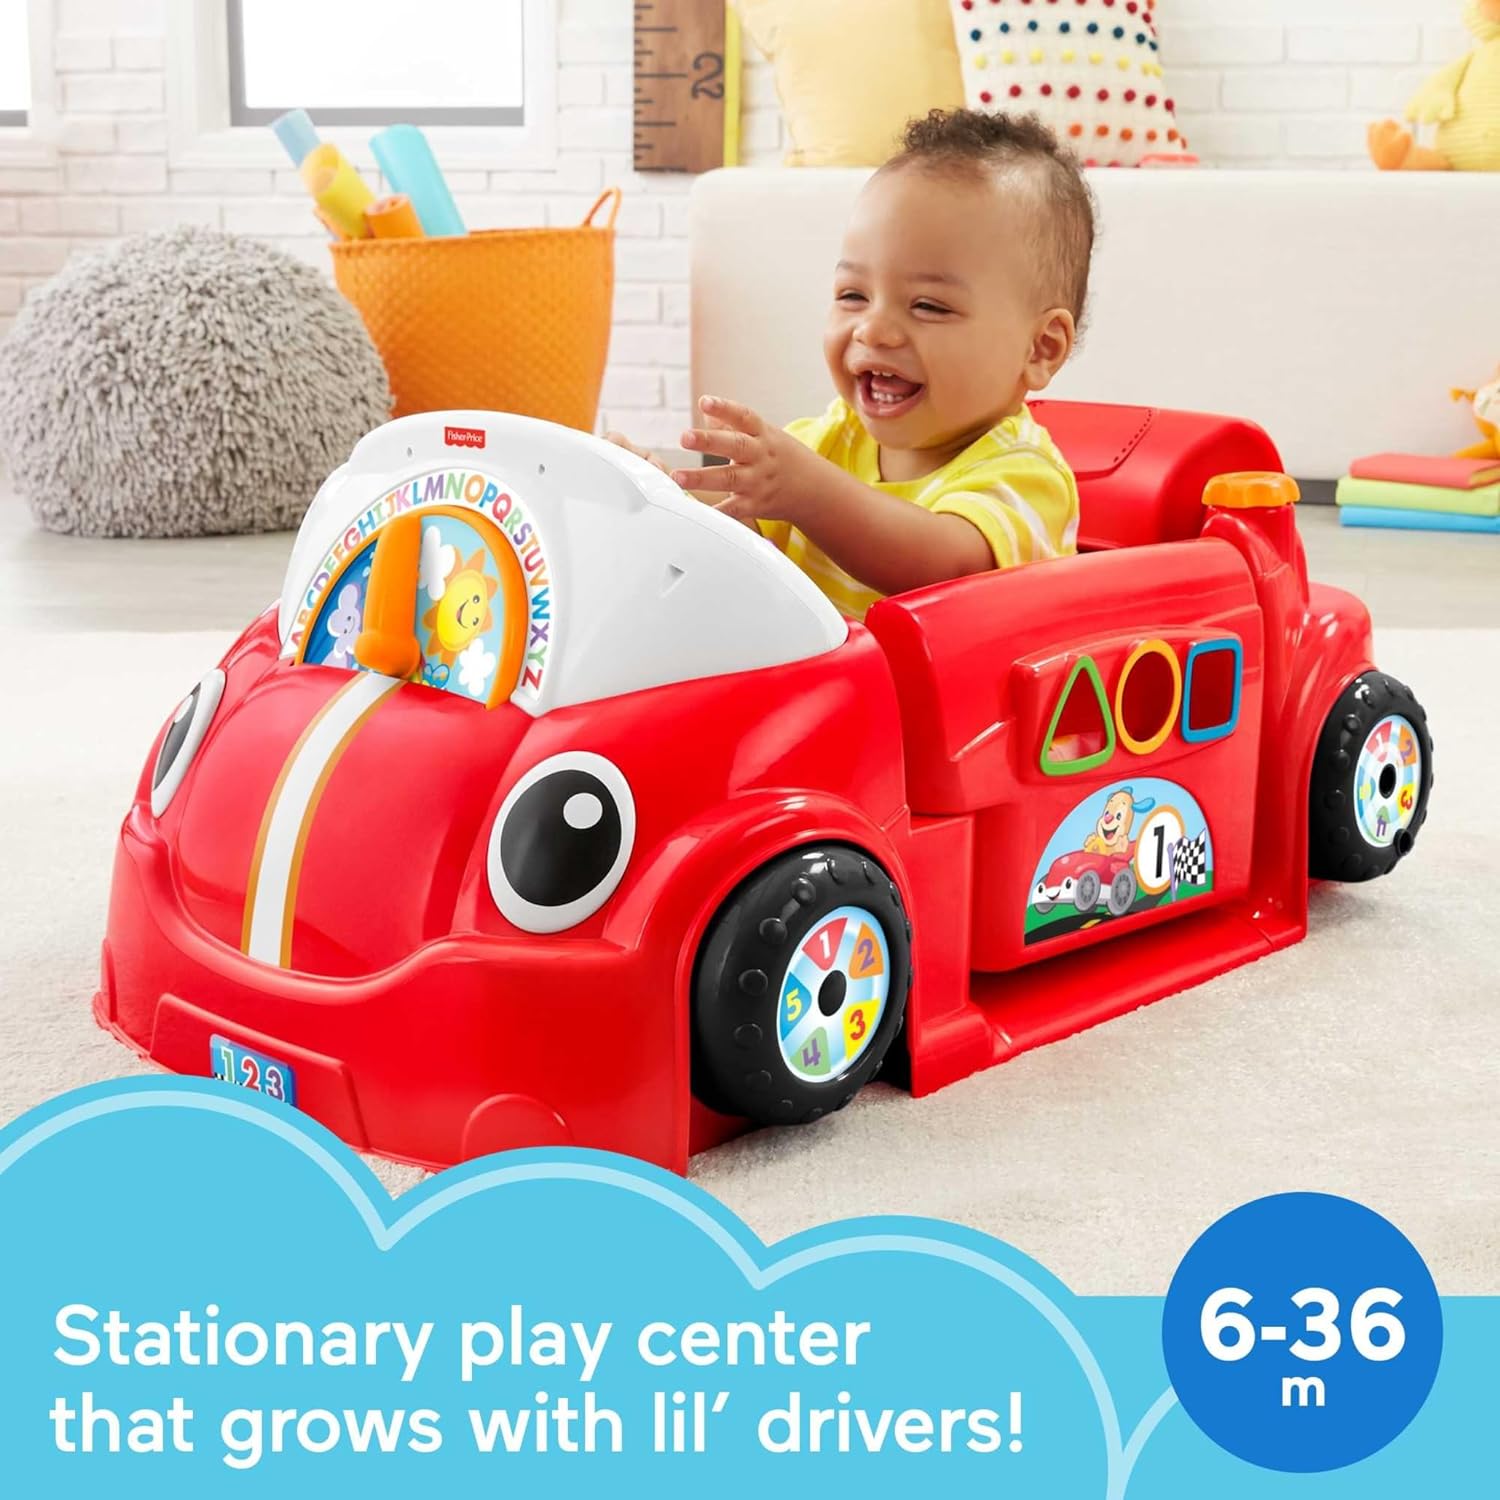 Fisher-Price Laugh & Learn Baby Activity Center Crawl Around Car with Music Lights and Smart Stages for Infants and Toddlers, Red